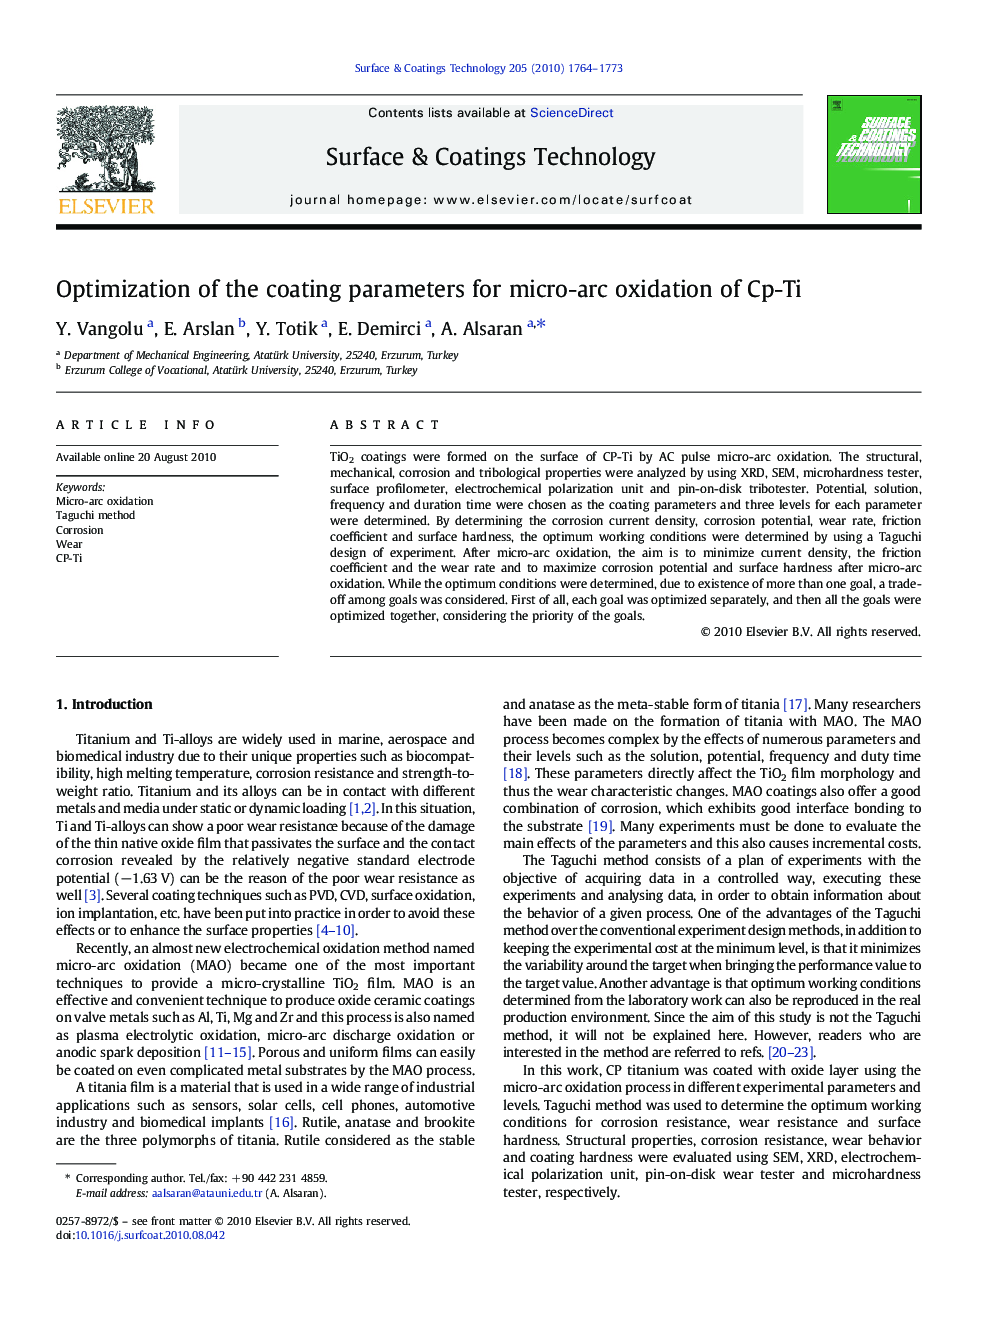 Optimization of the coating parameters for micro-arc oxidation of Cp-Ti